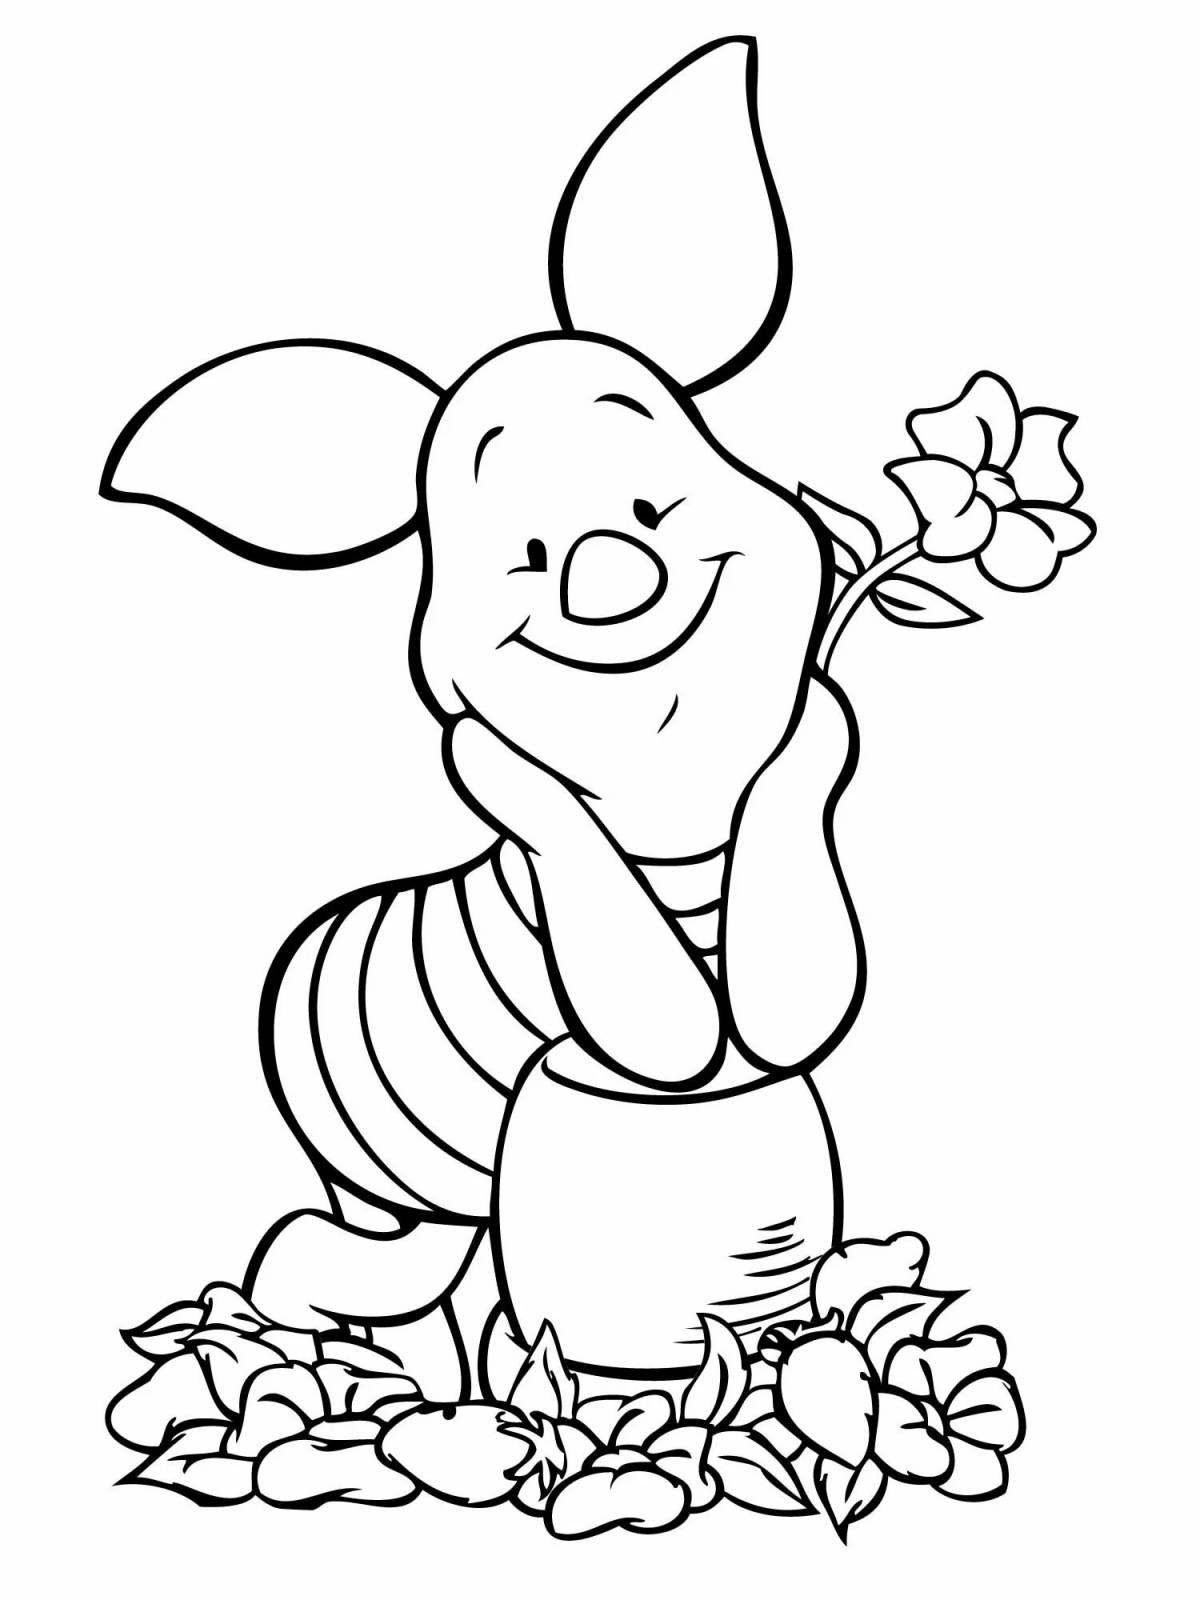 Adorable cartoon characters coloring book for 5-6 year olds